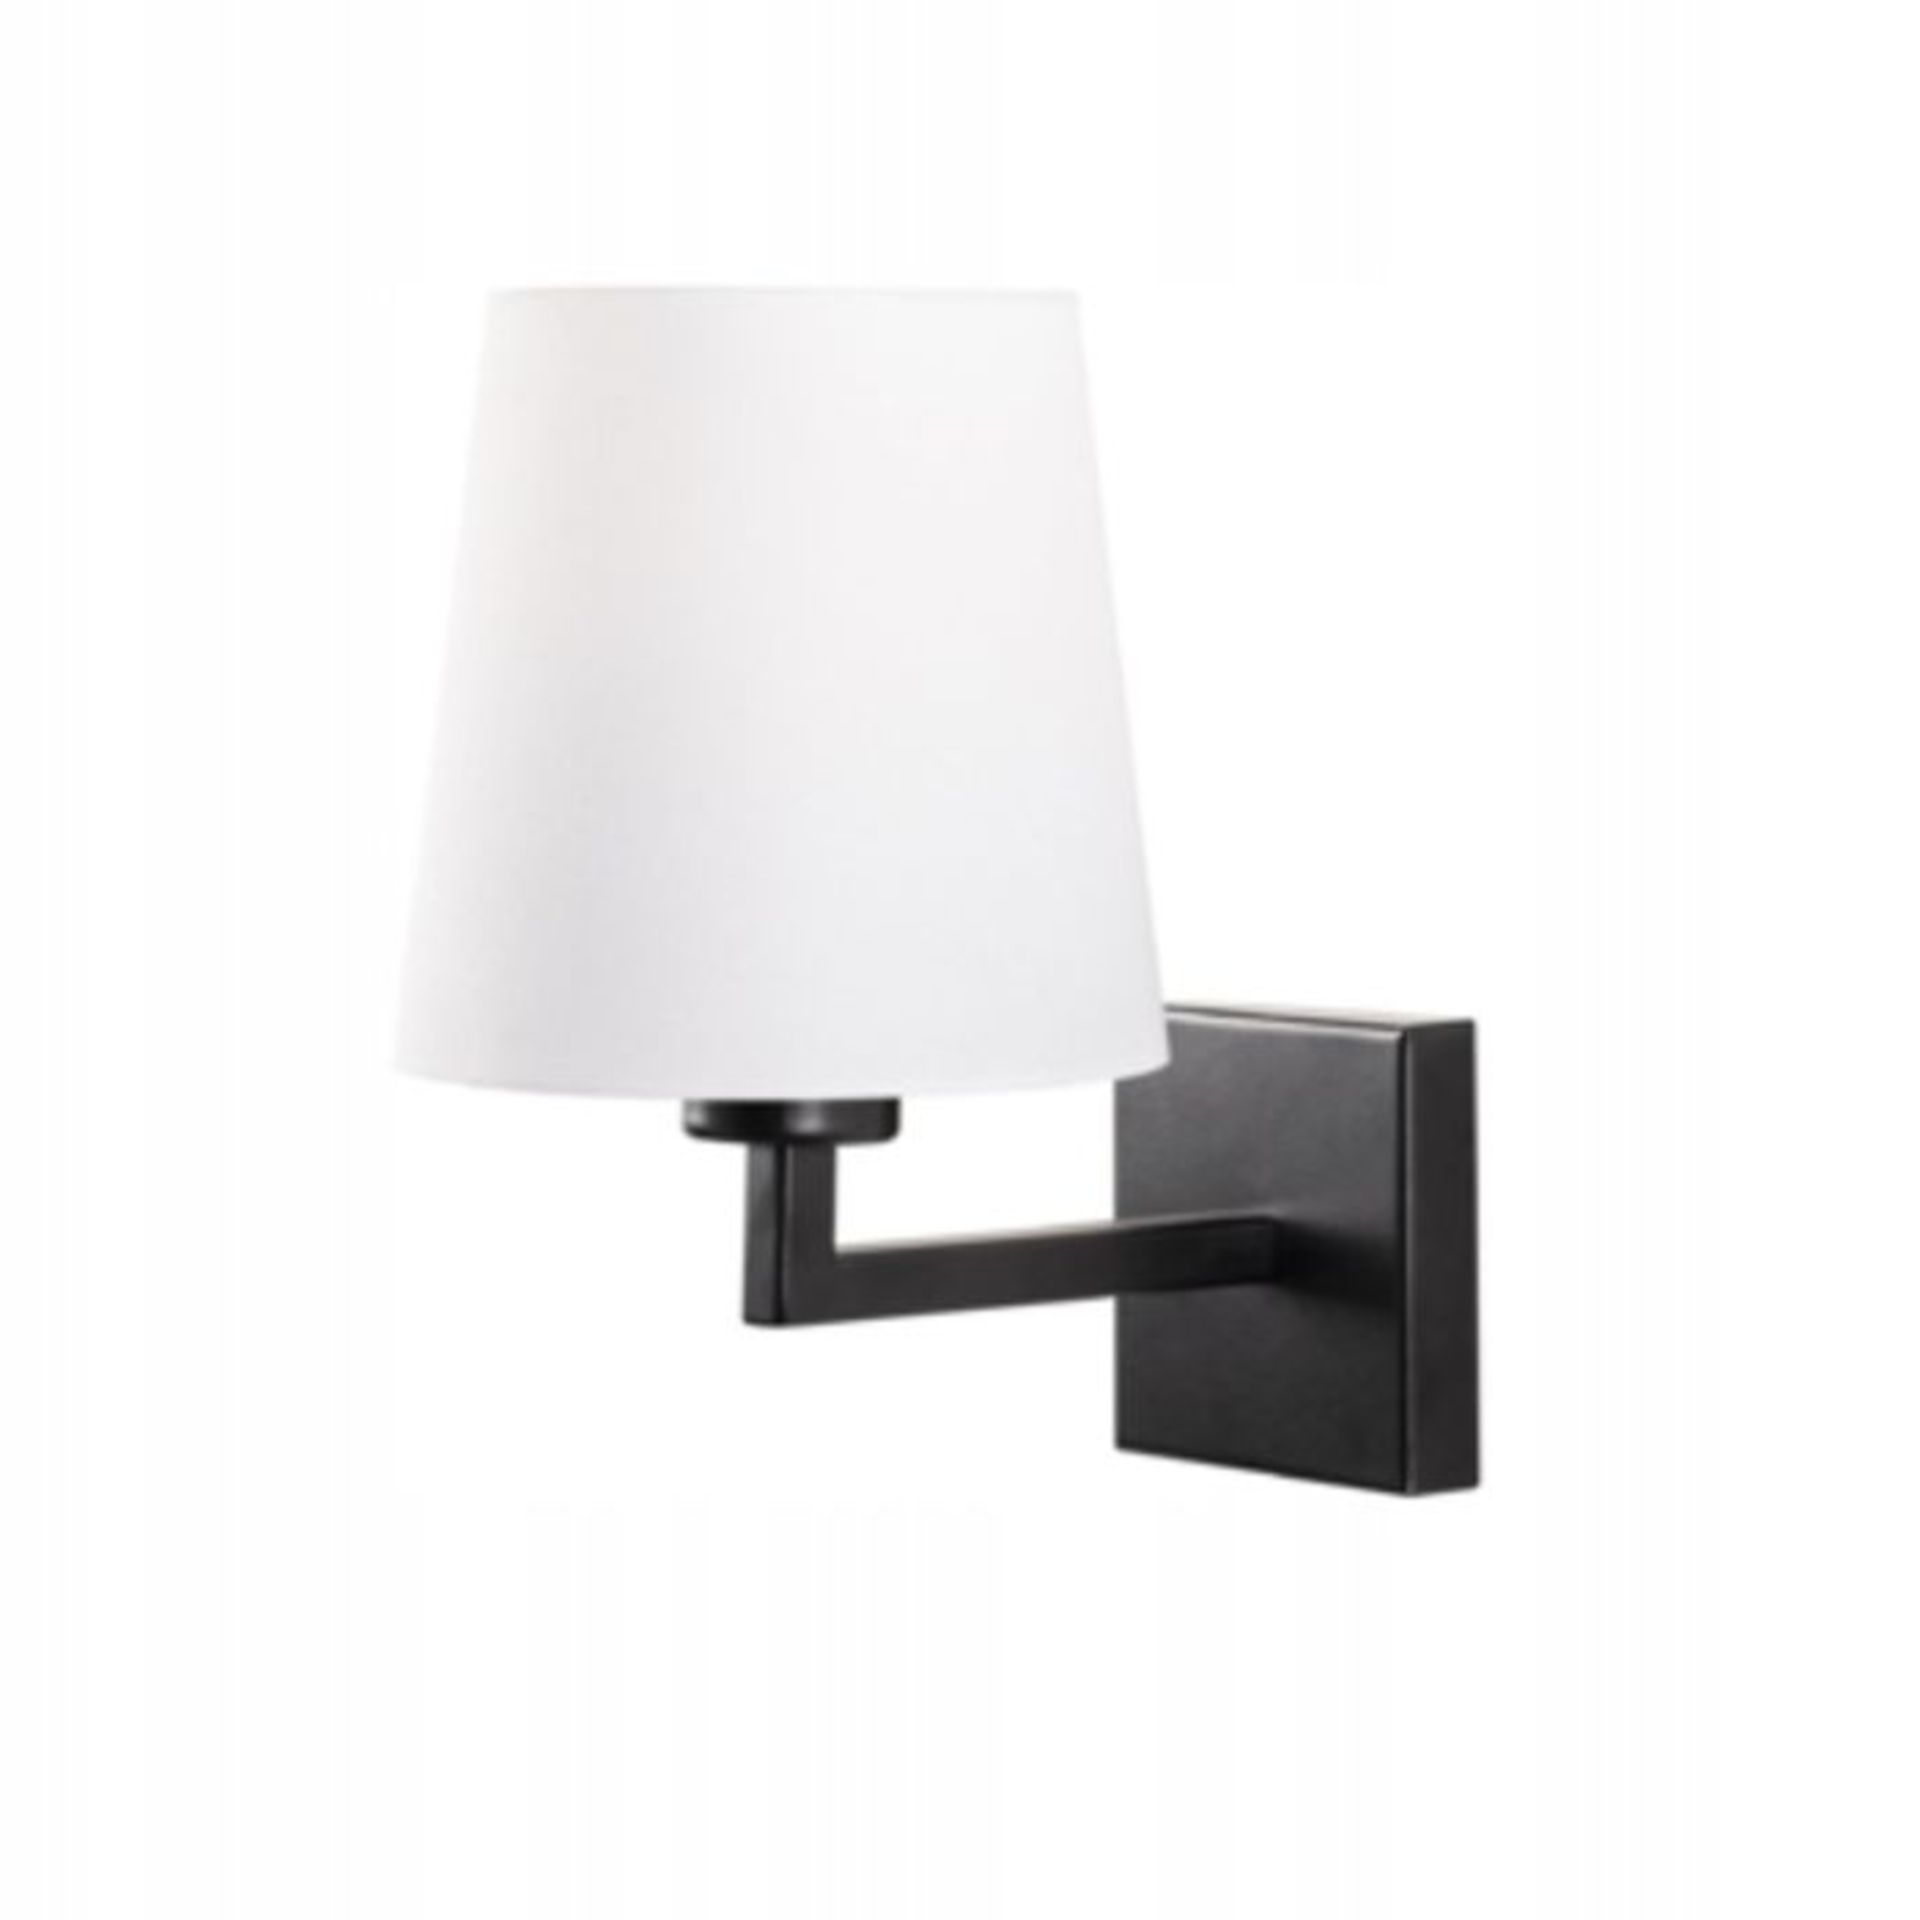 Opvia, Wall Light (BLACK BASE ONLY) (NO SHADE INCLUDED) (QYUT3254 - 26404/6) - Image 2 of 2